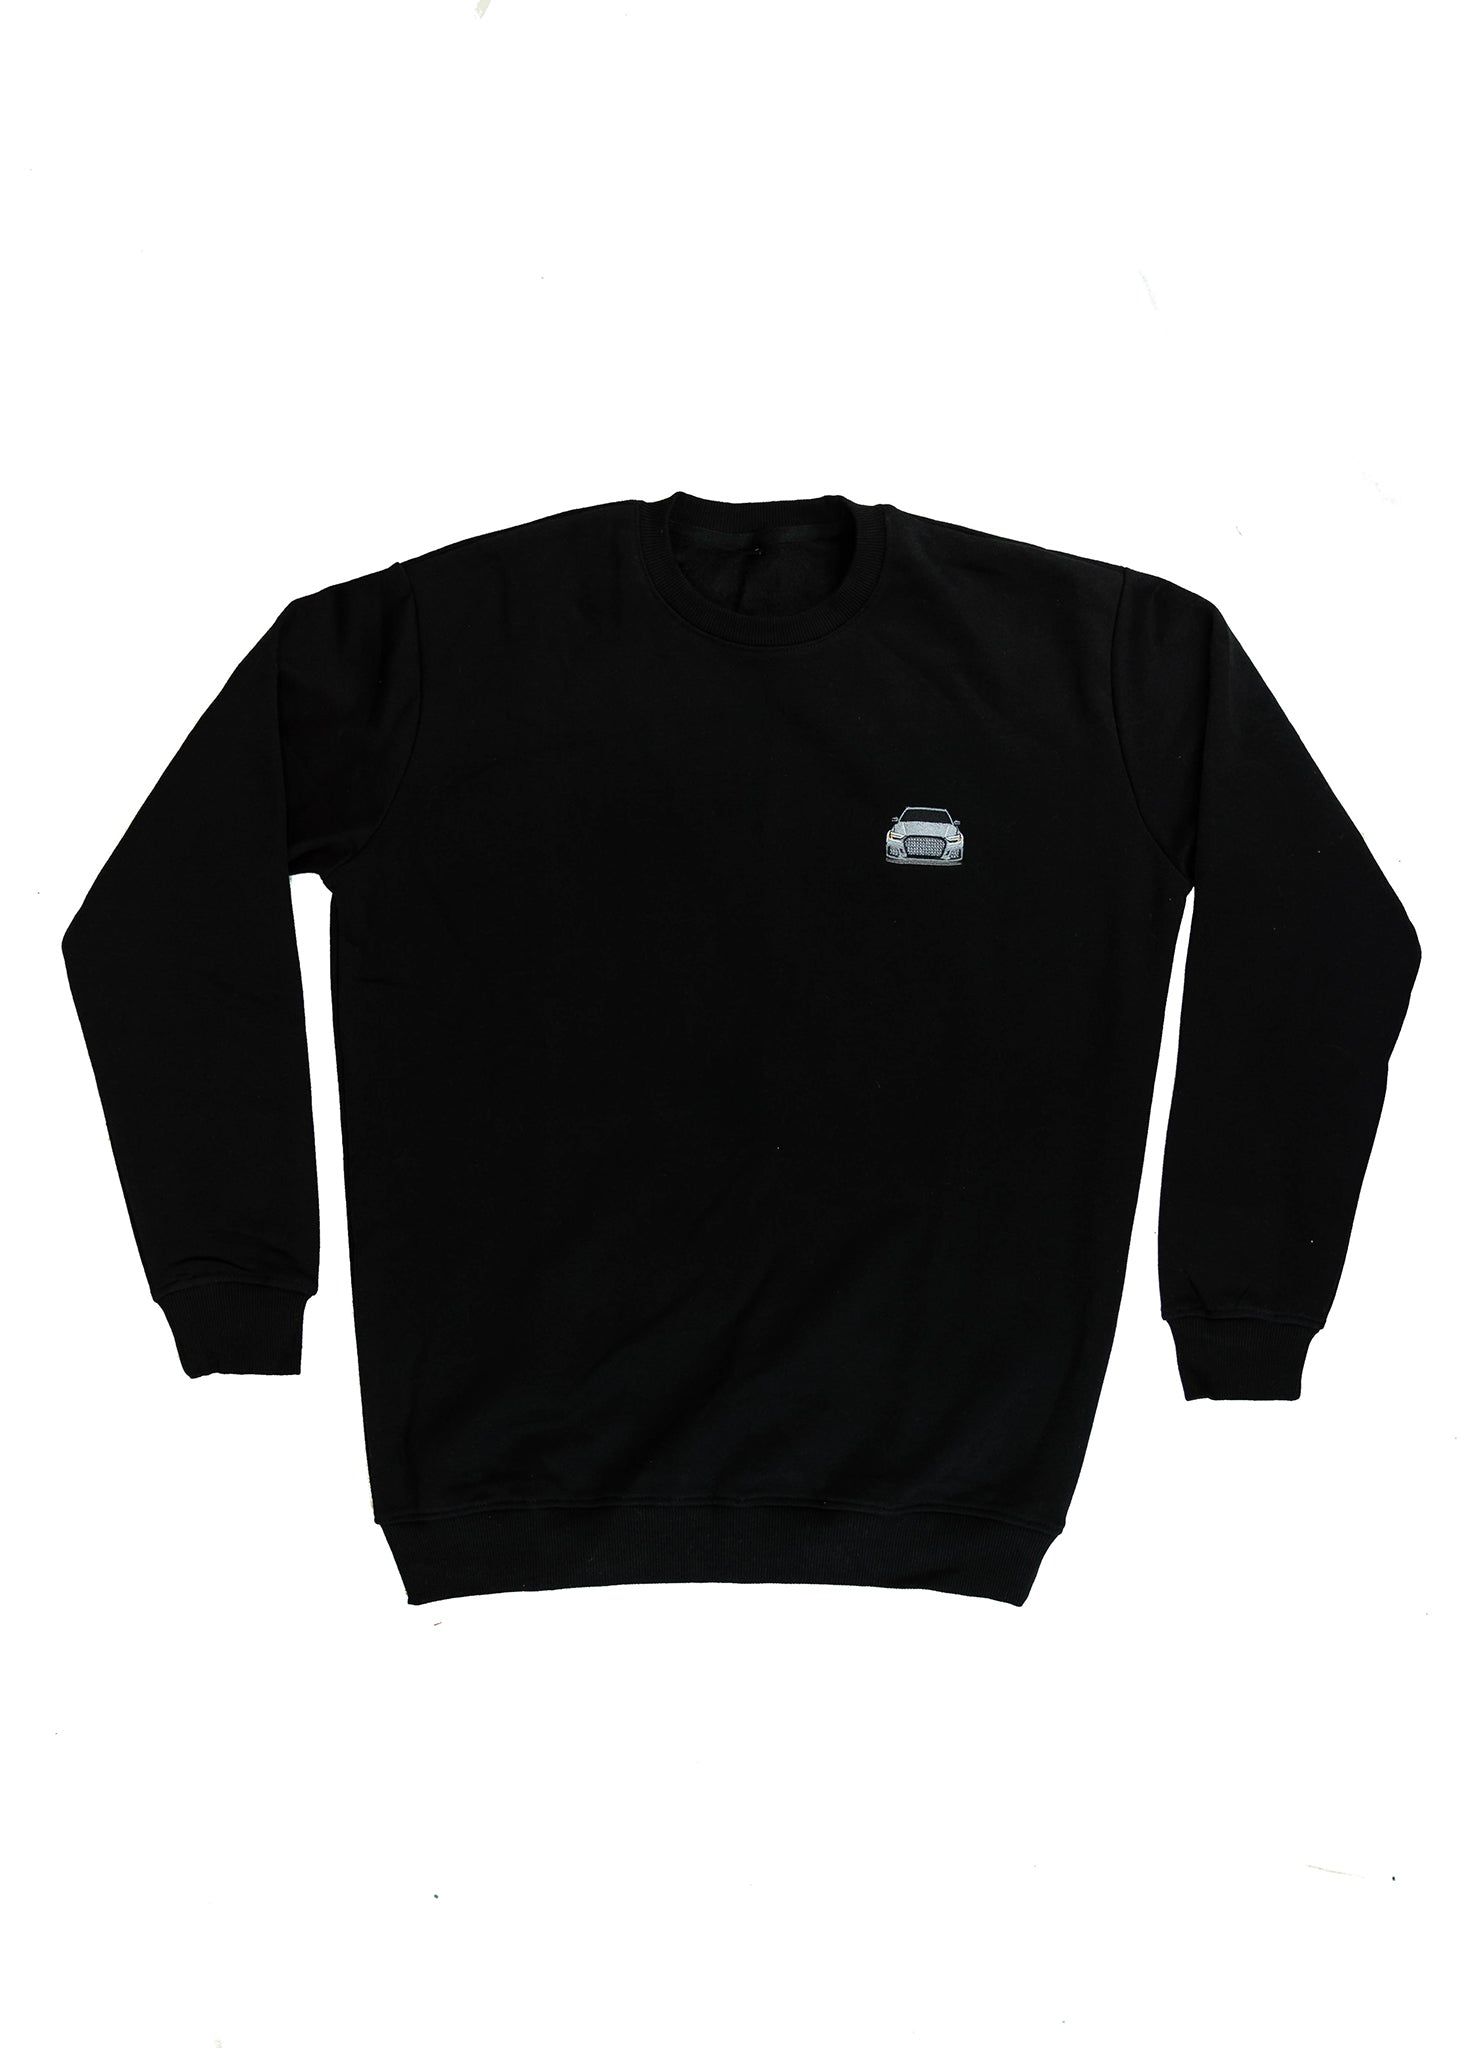 A black men's high quality crewneck sweater. Full size front view of the black sweater with a nardo grey embroidered 8V RS3. Fabric composition is a mix of cotton and polyester. The material is very soft, stretchy, and non-transparent. The style of this sweater is a crewneck, long sleeve, elastic bottom, with embroidery on the left chest.